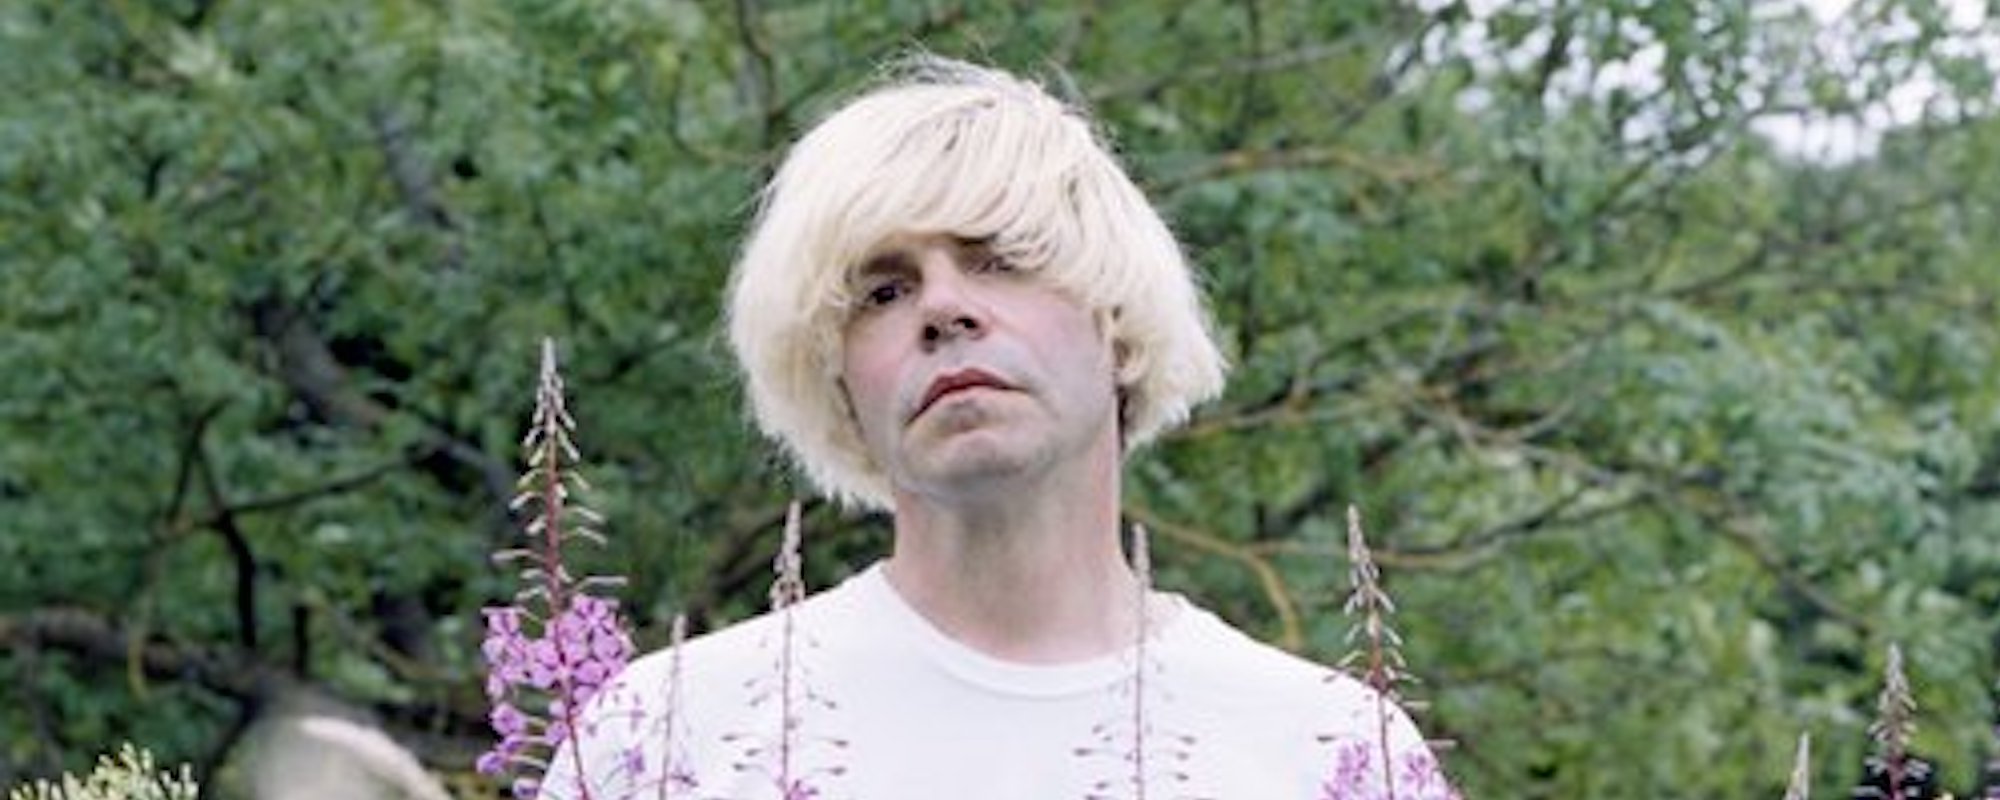 An Album You May Have Missed in 2022: Tim Burgess Makes ‘Typical Music,’ New Album with The Charlatans